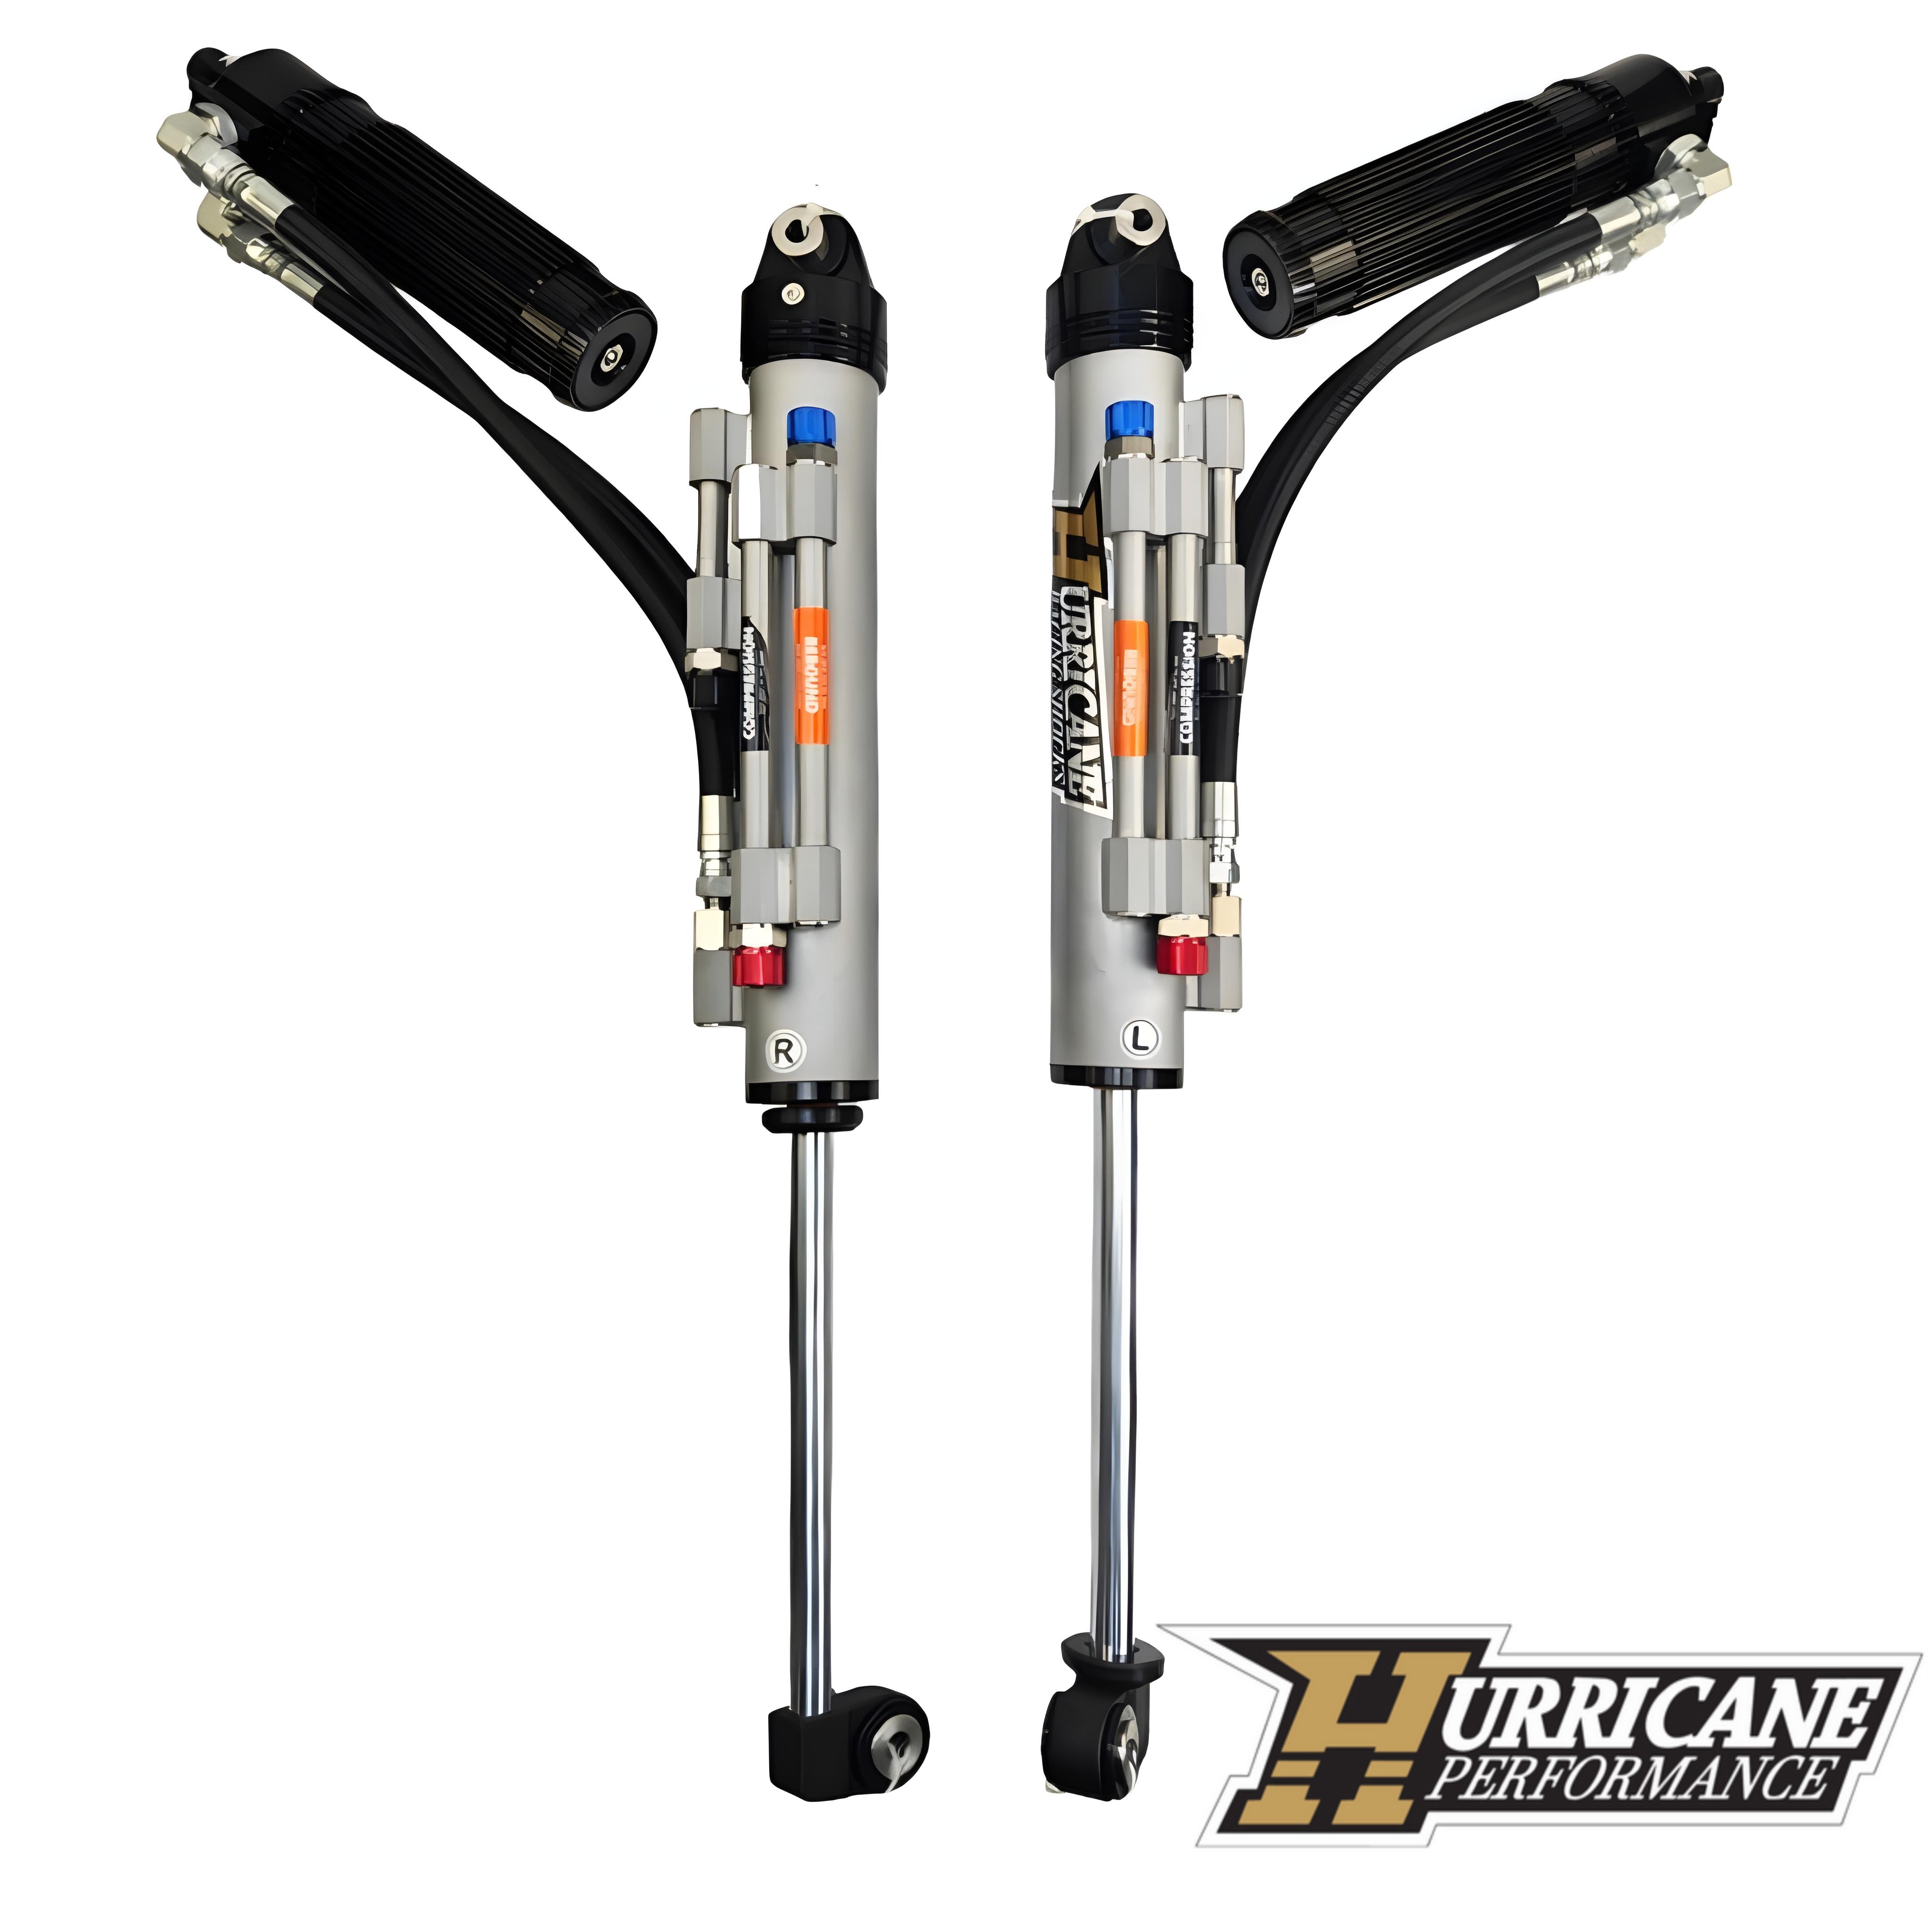 Hurricane Performance Extreme Series Shocks 2.5" Triple Bypass Adjustable (Front Oil Pipe From Down Side) for Jeep Wrangler JL/JT (NEW DESIGN)